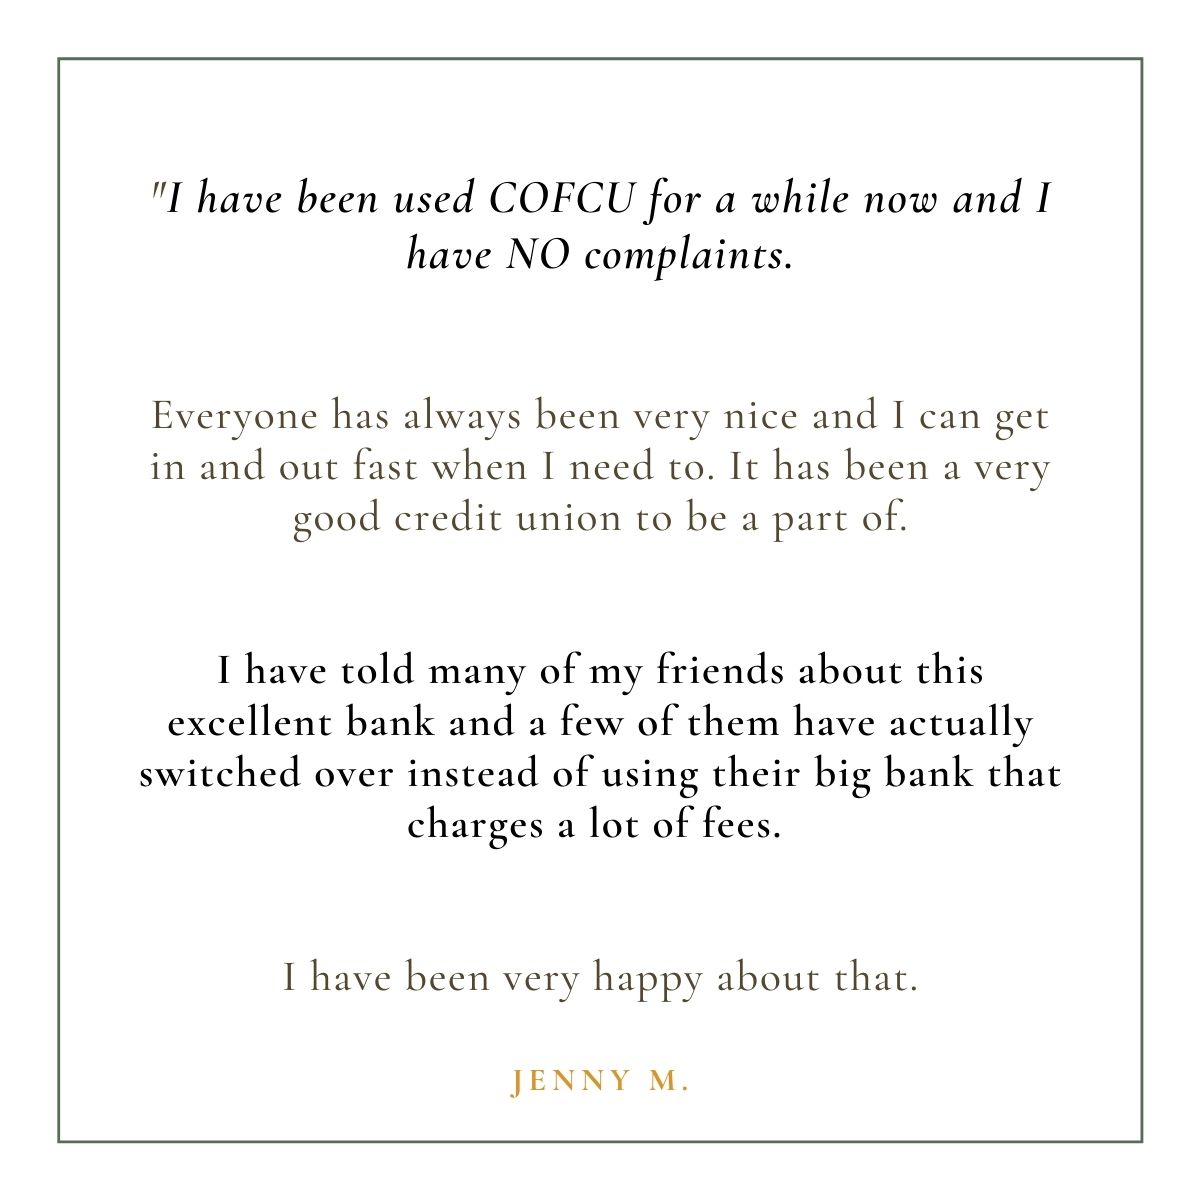 Thank you for this wonderful feedback, Jenny! At CommonWealth One, we pride ourselves on our low transaction fees and friendly customer support. Let us know what YOU love about COFCU! https://t.co/utfUqhmX7M